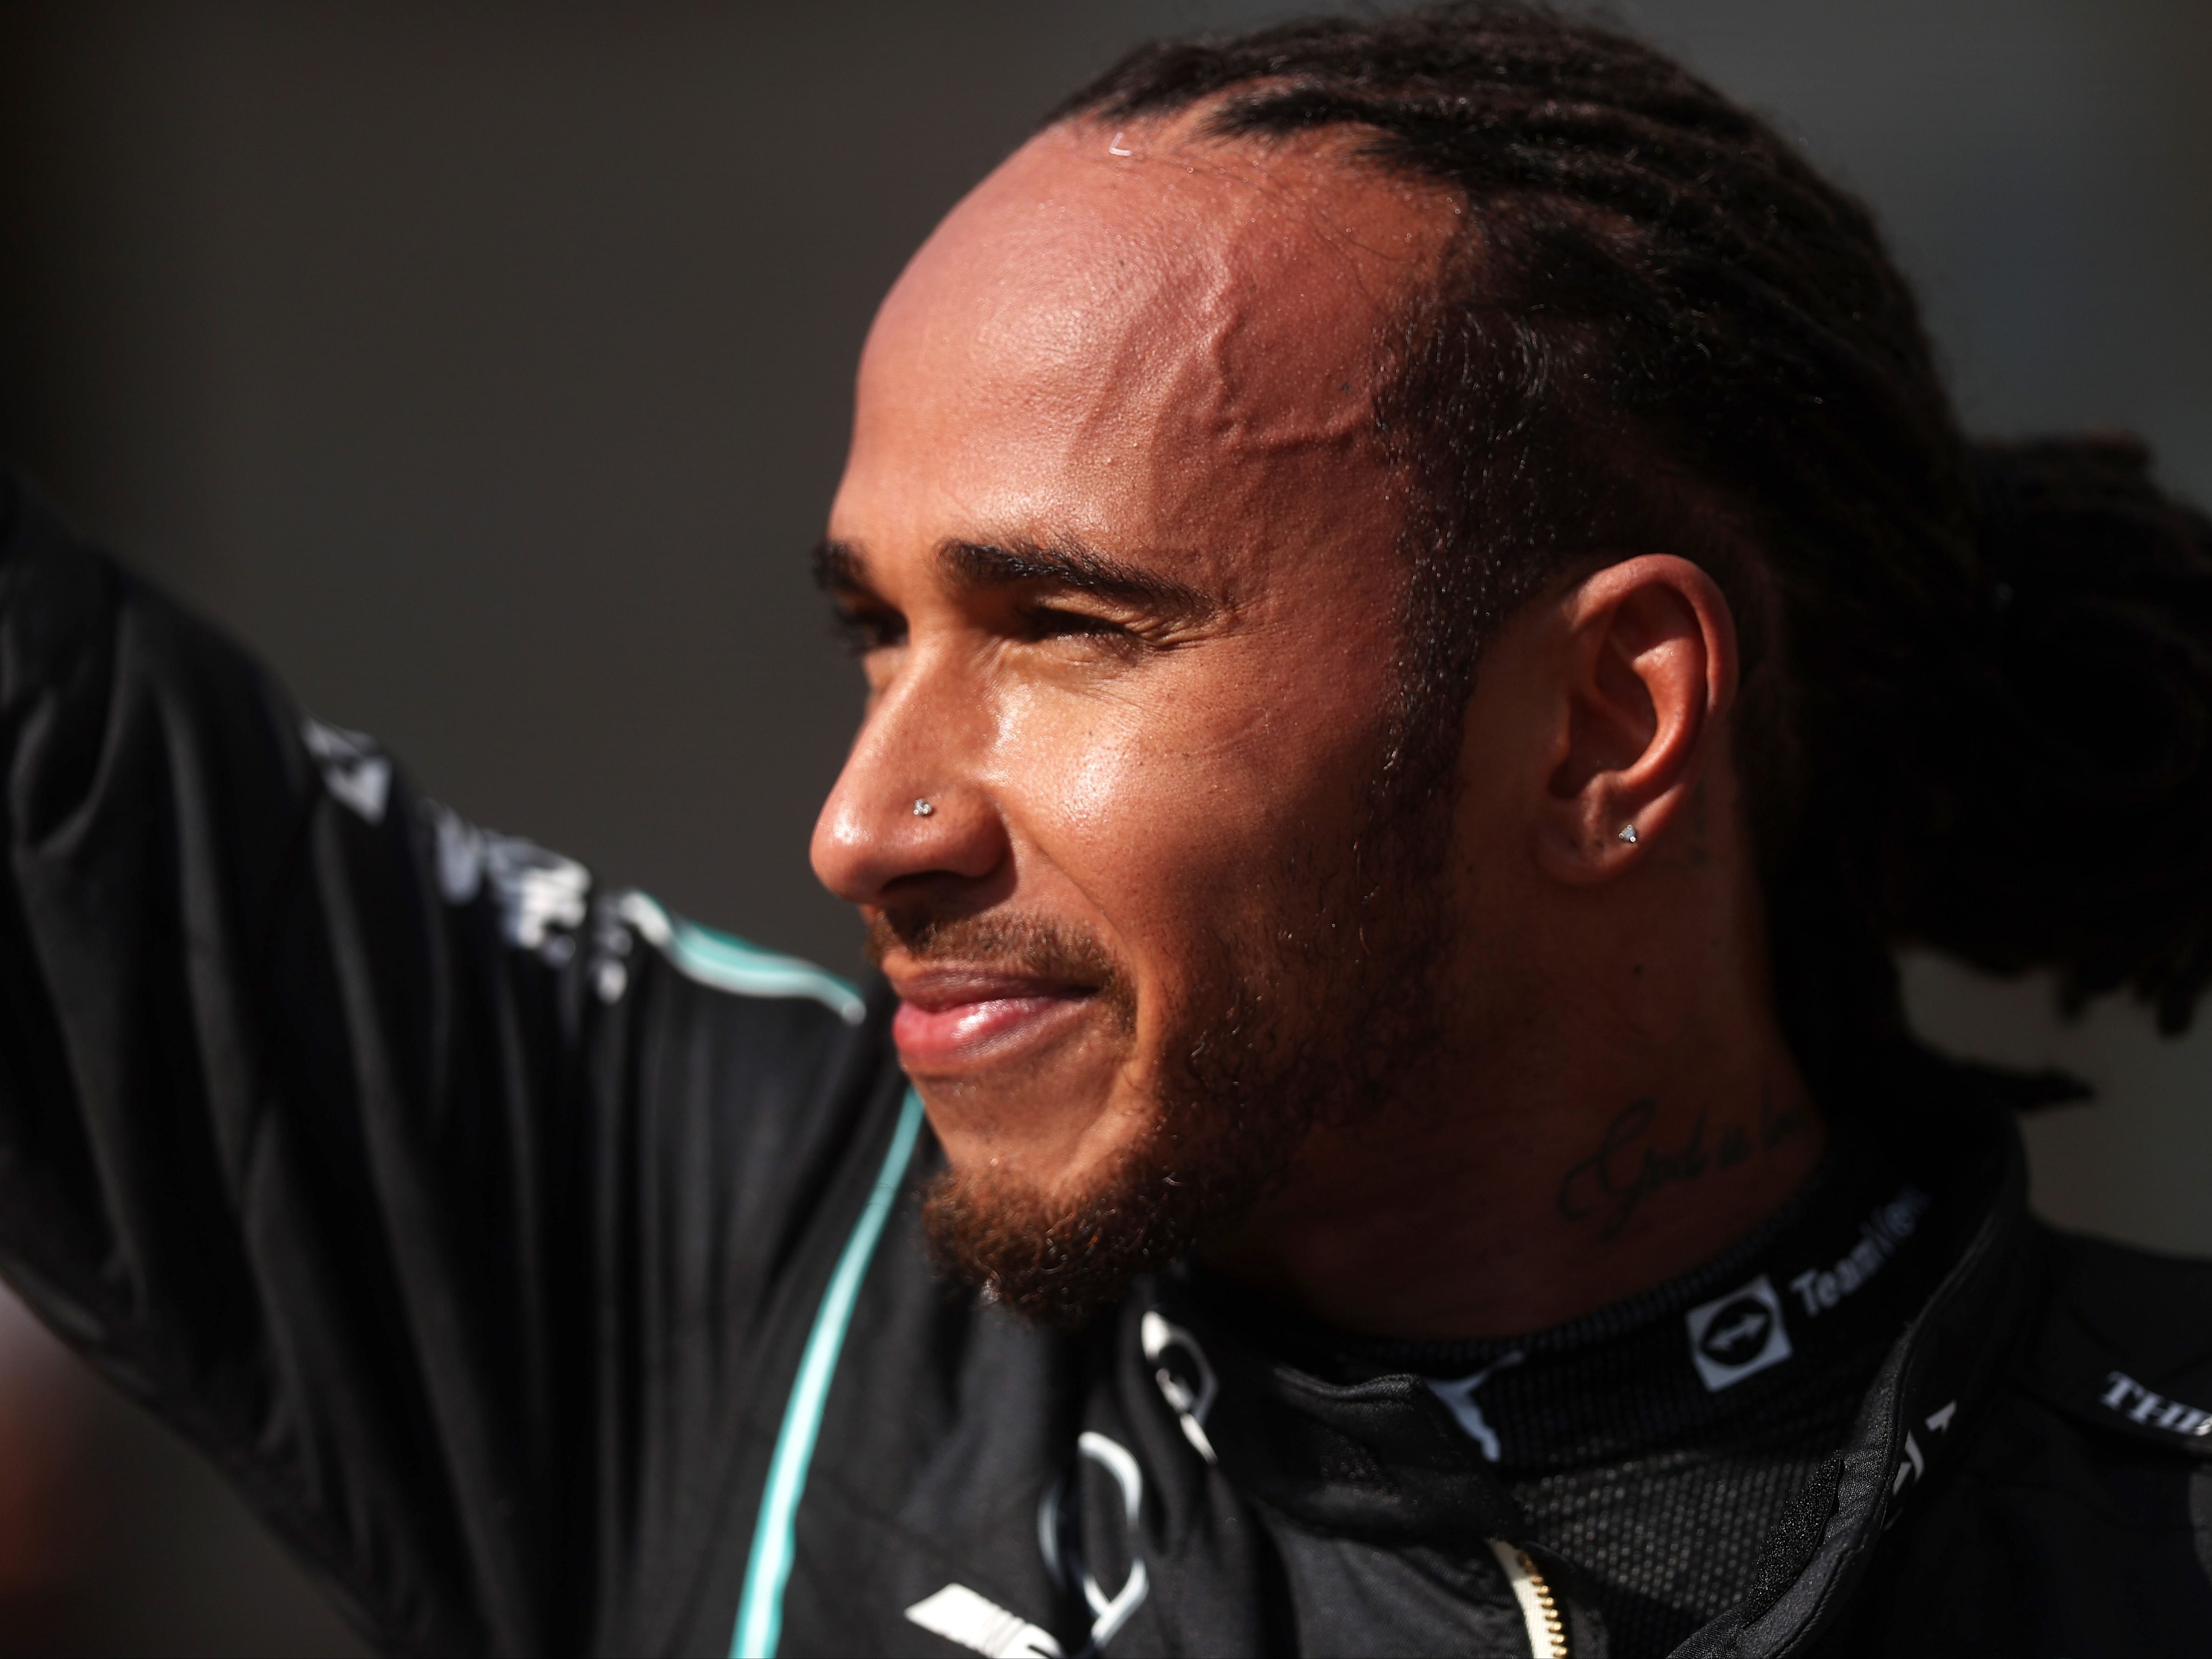 Lewis Hamilton celebrates in parc ferme during the 2021 F1 Brazilian Grand Prix. (Photo by Lars Baron/Getty Images)